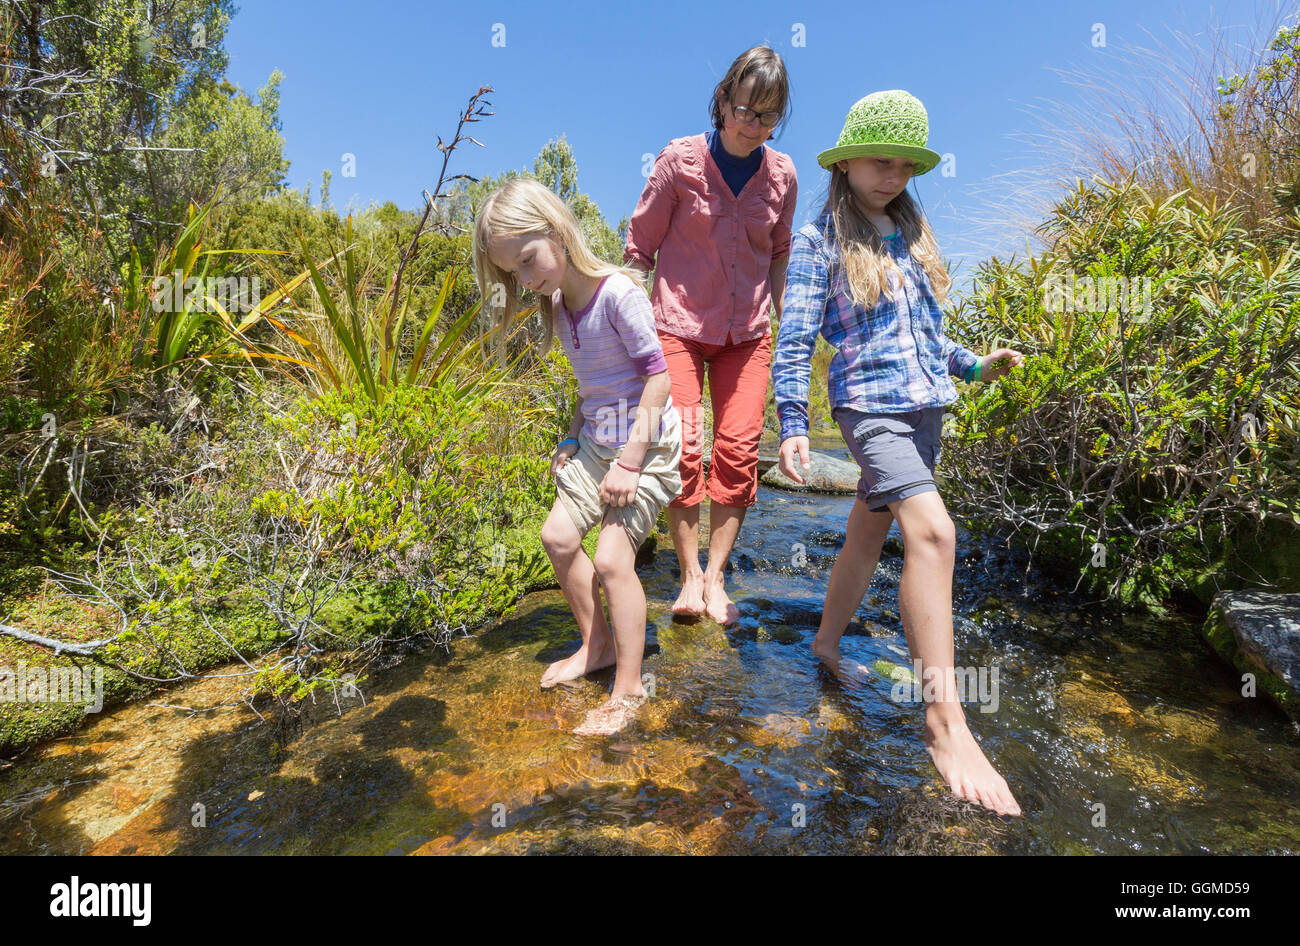 Two girls and an woman wading barefoot in a creek, Abel Tasman National Park, South Island, New Zealand Stock Photo